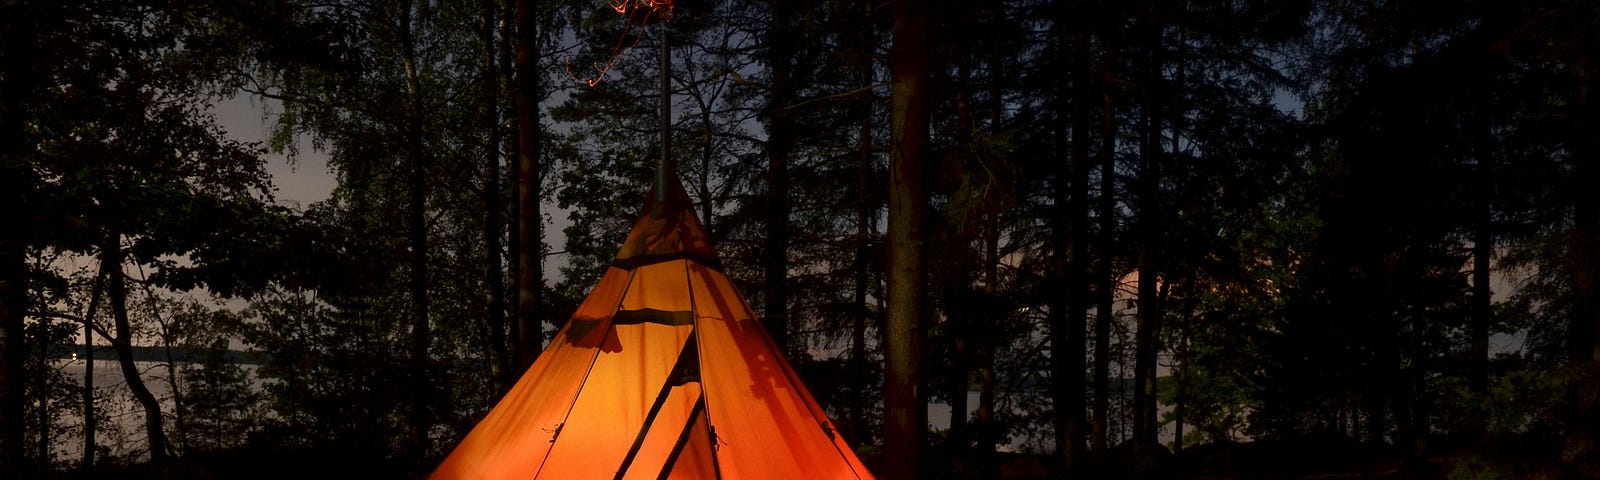 A tipi glows in the darkness